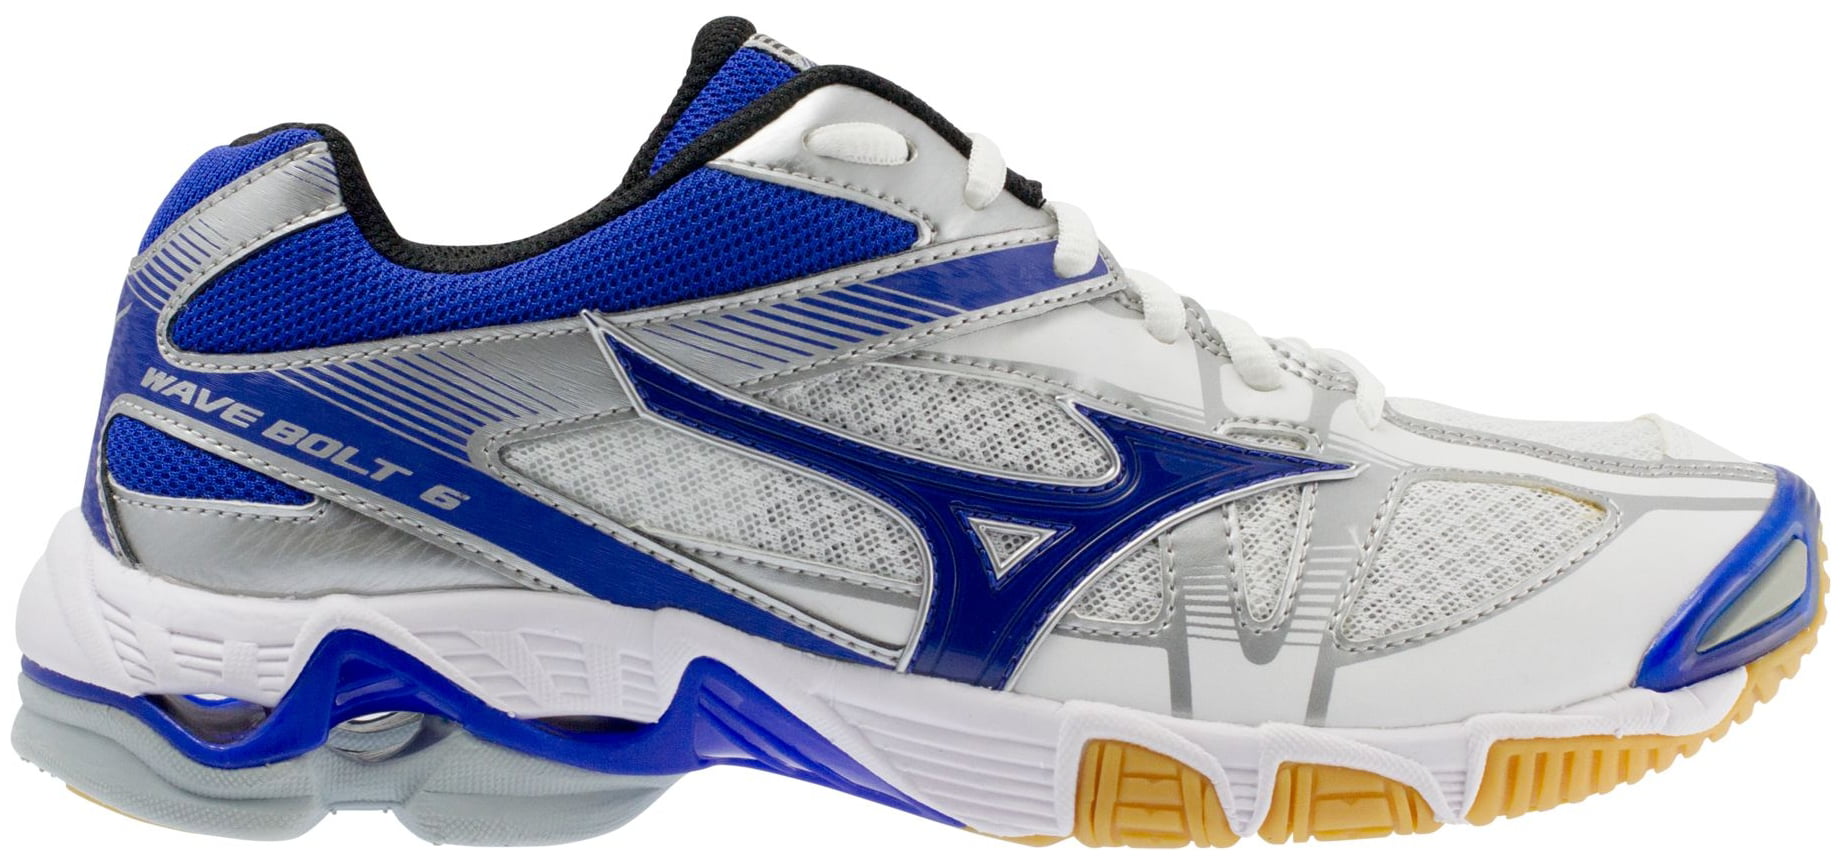 Wave Bolt 6 Volleyball Shoes 